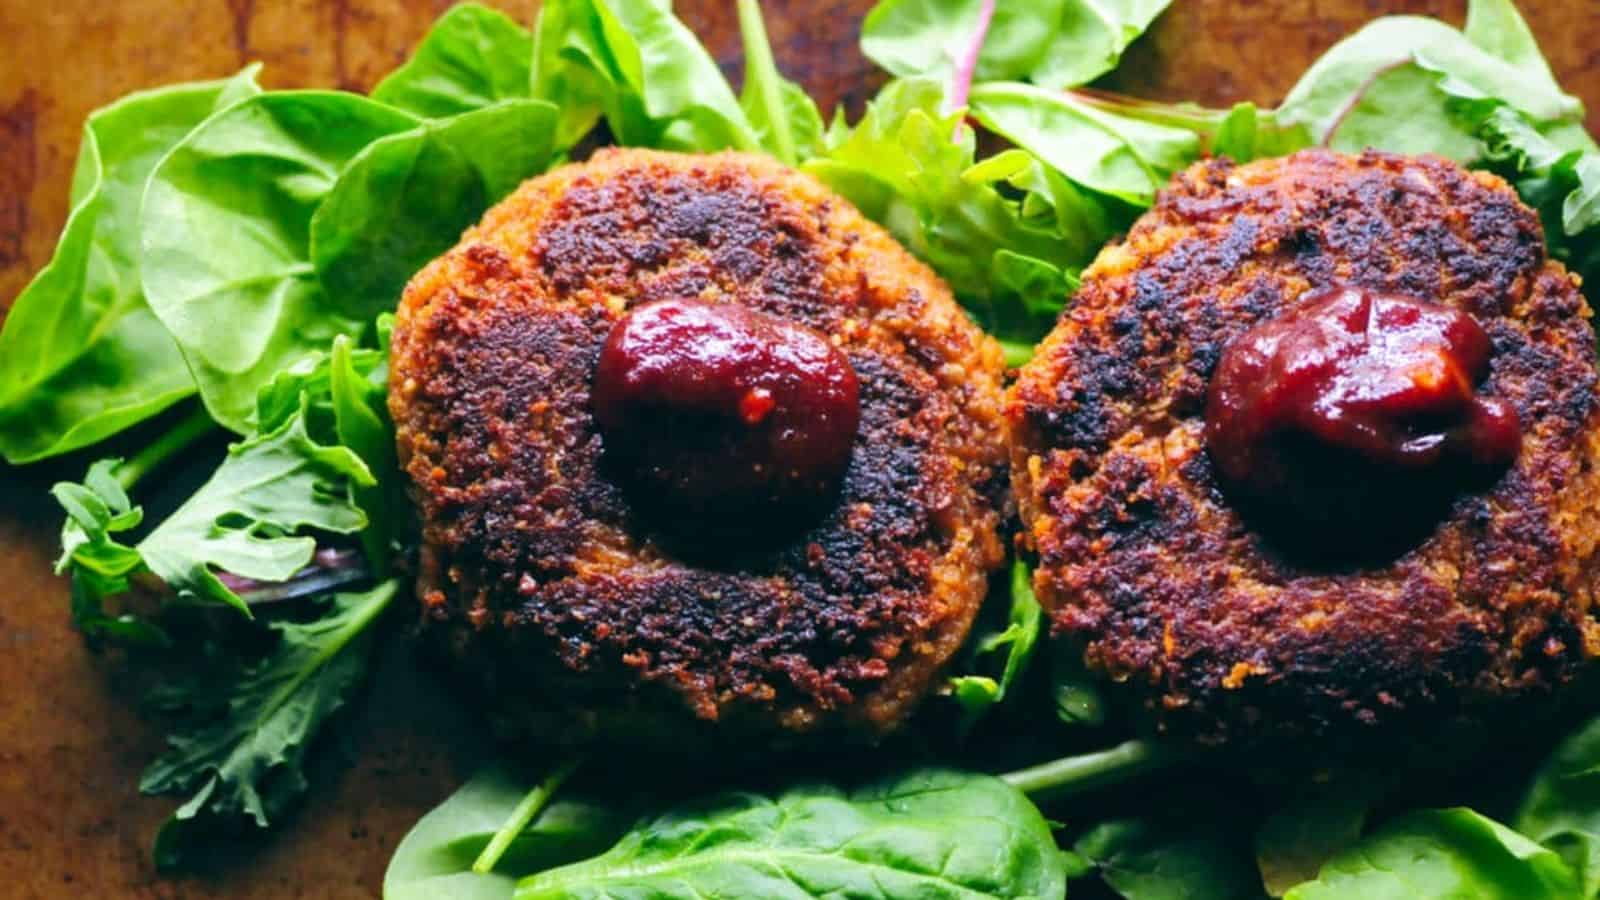 Overhead image of two BBQ walnut chickpea veggie burgers on a bed of green leafy vegetables.